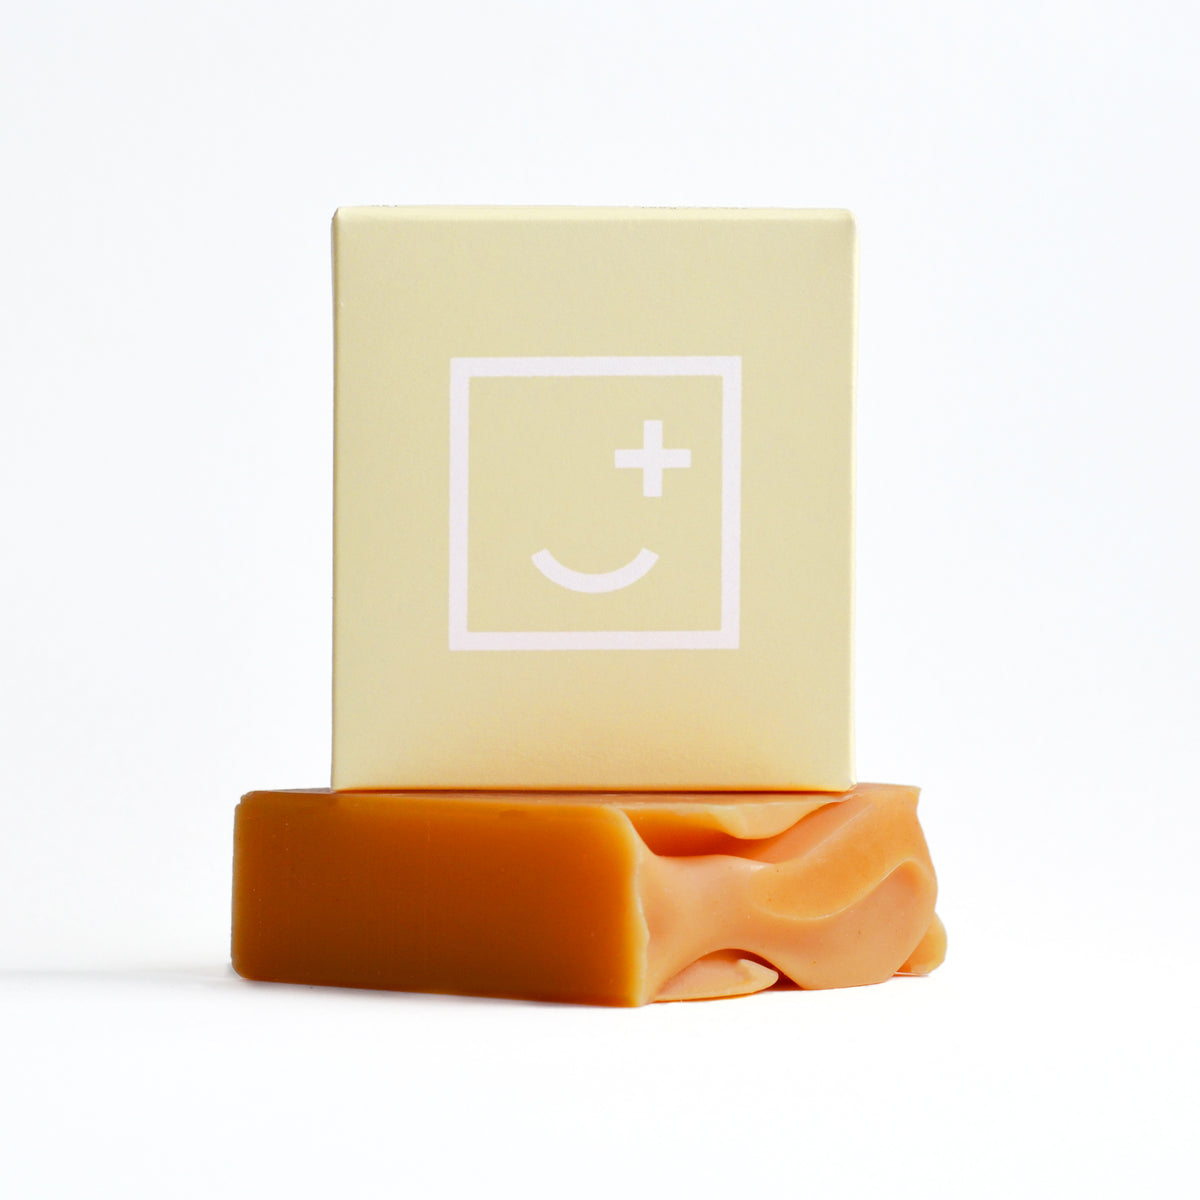 FAIR + SQUARE | LEMONY SNICKET FACE WASH